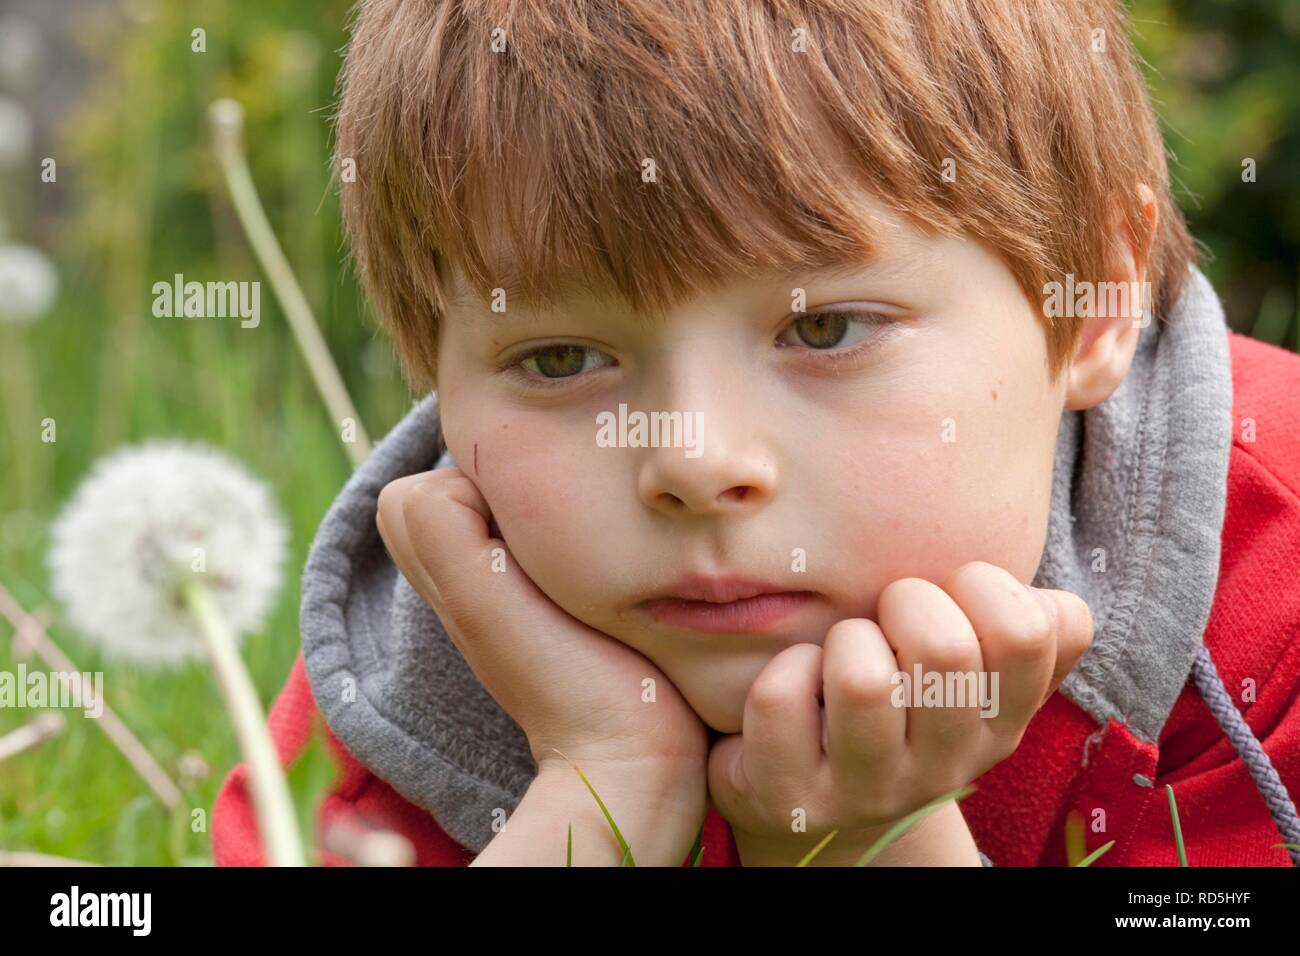 Little boy looking at a blowball Stock Photo